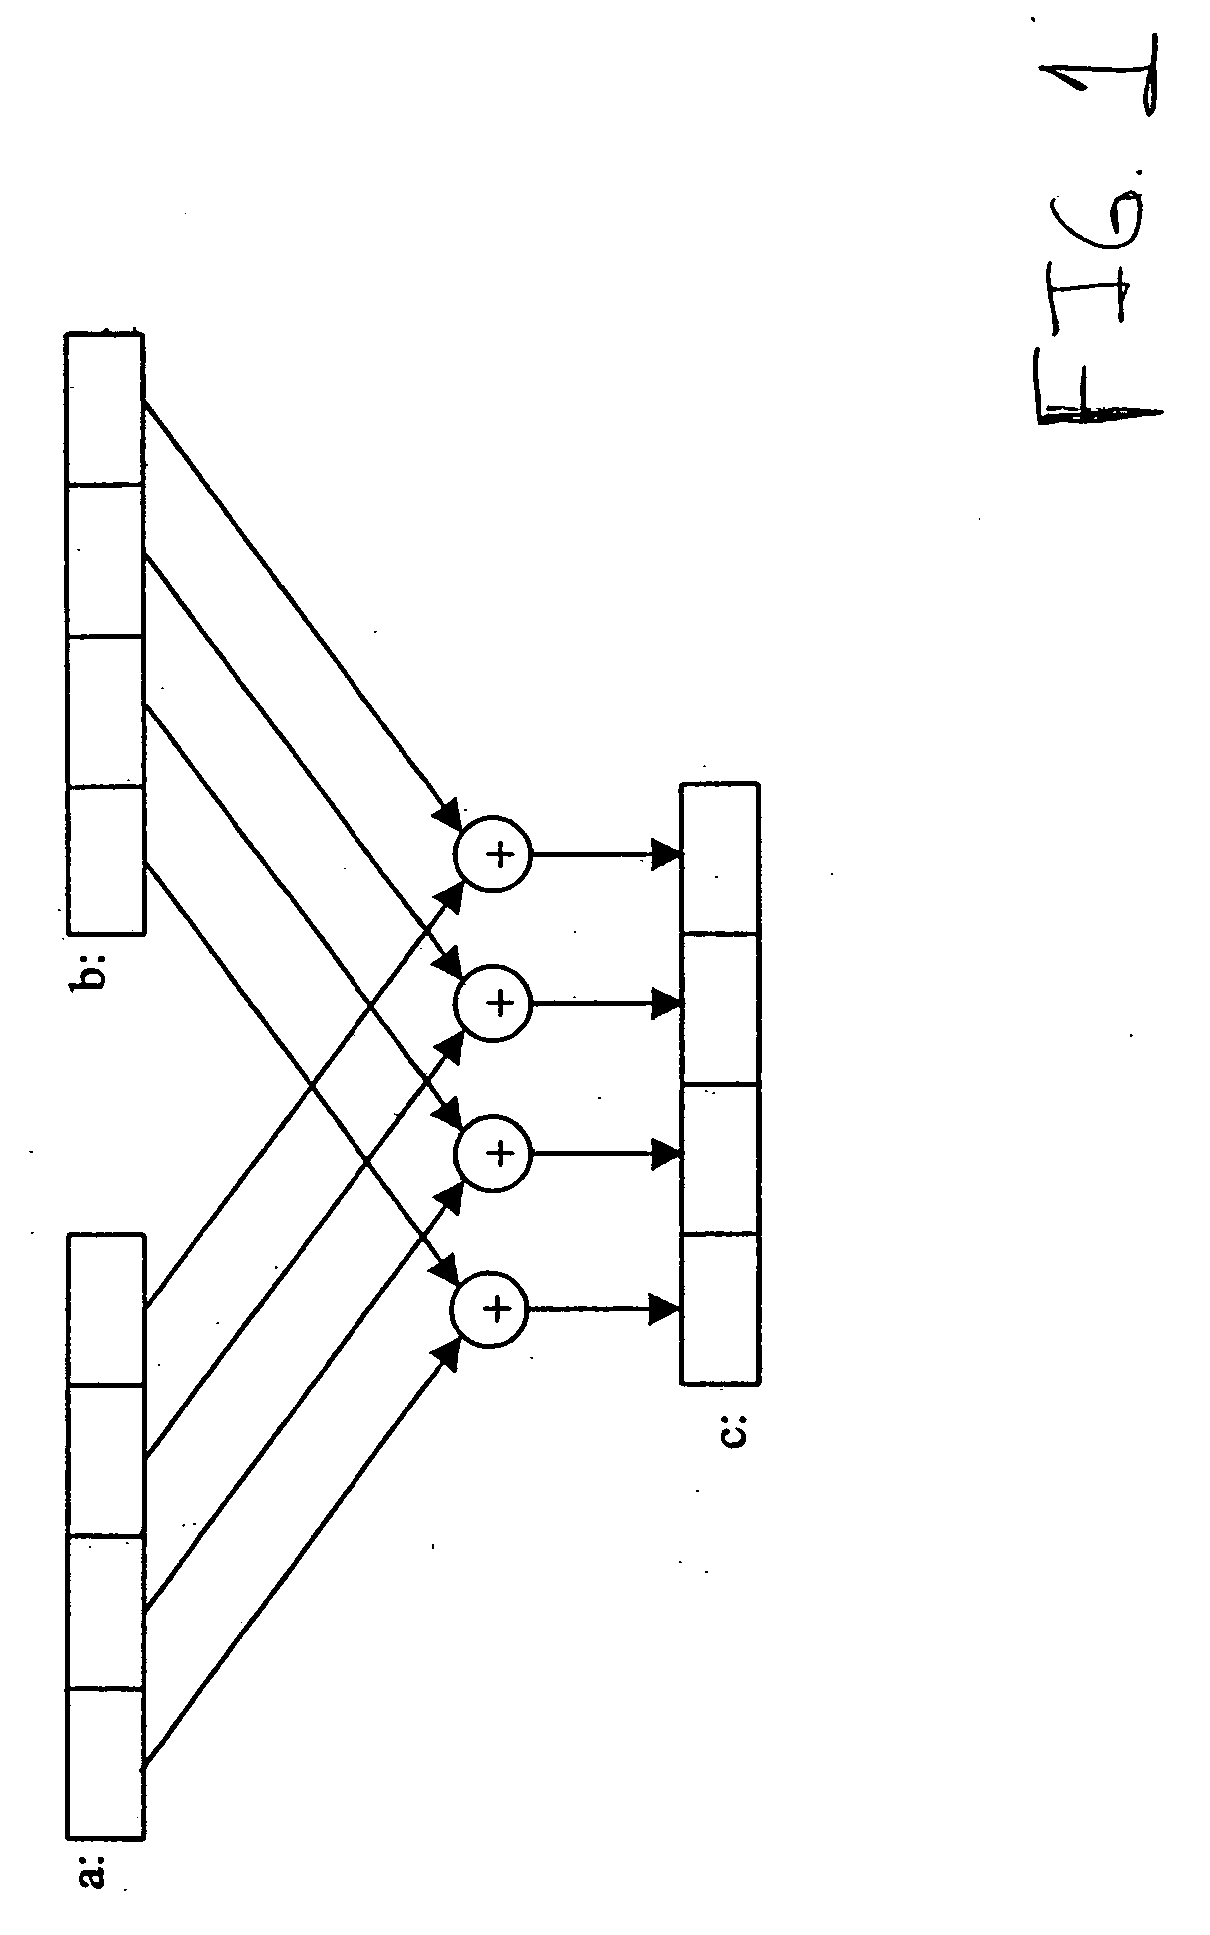 Methods for performing multiplication operations on operands representing complex numbers